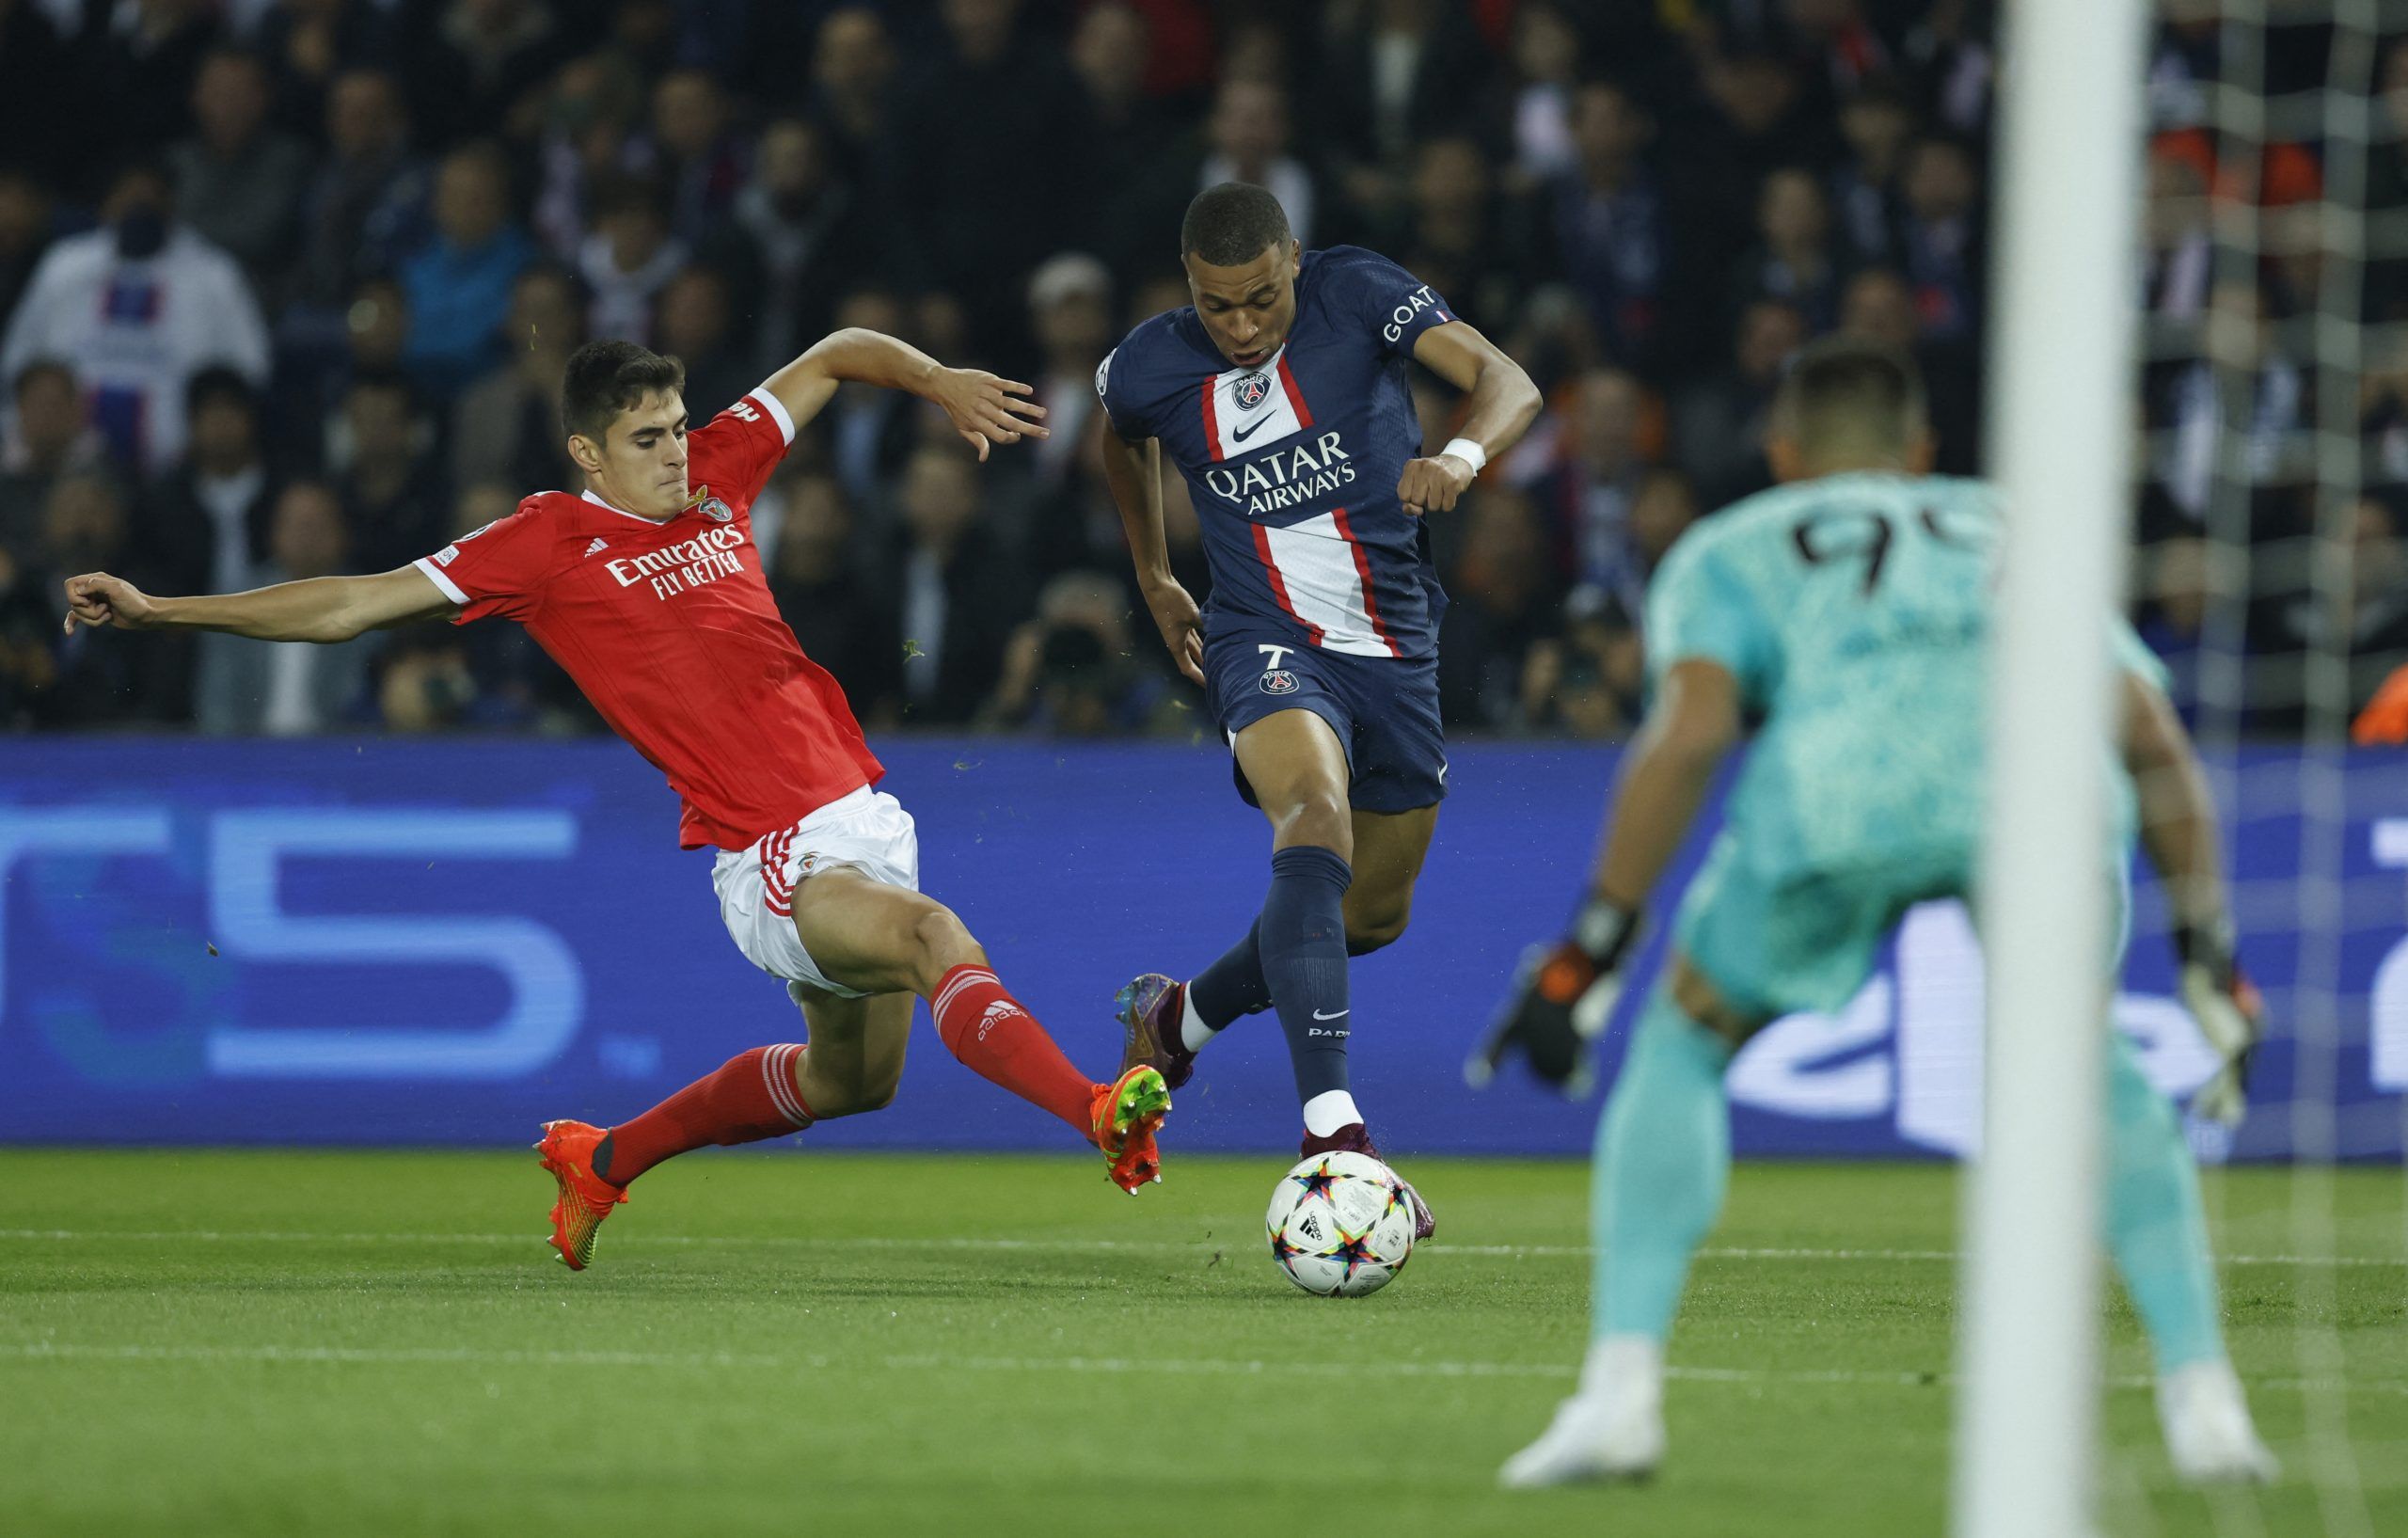 Liverpool: Kylian Mbappe ‘spoke to’ Reds before signing new PSG deal -Liverpool News